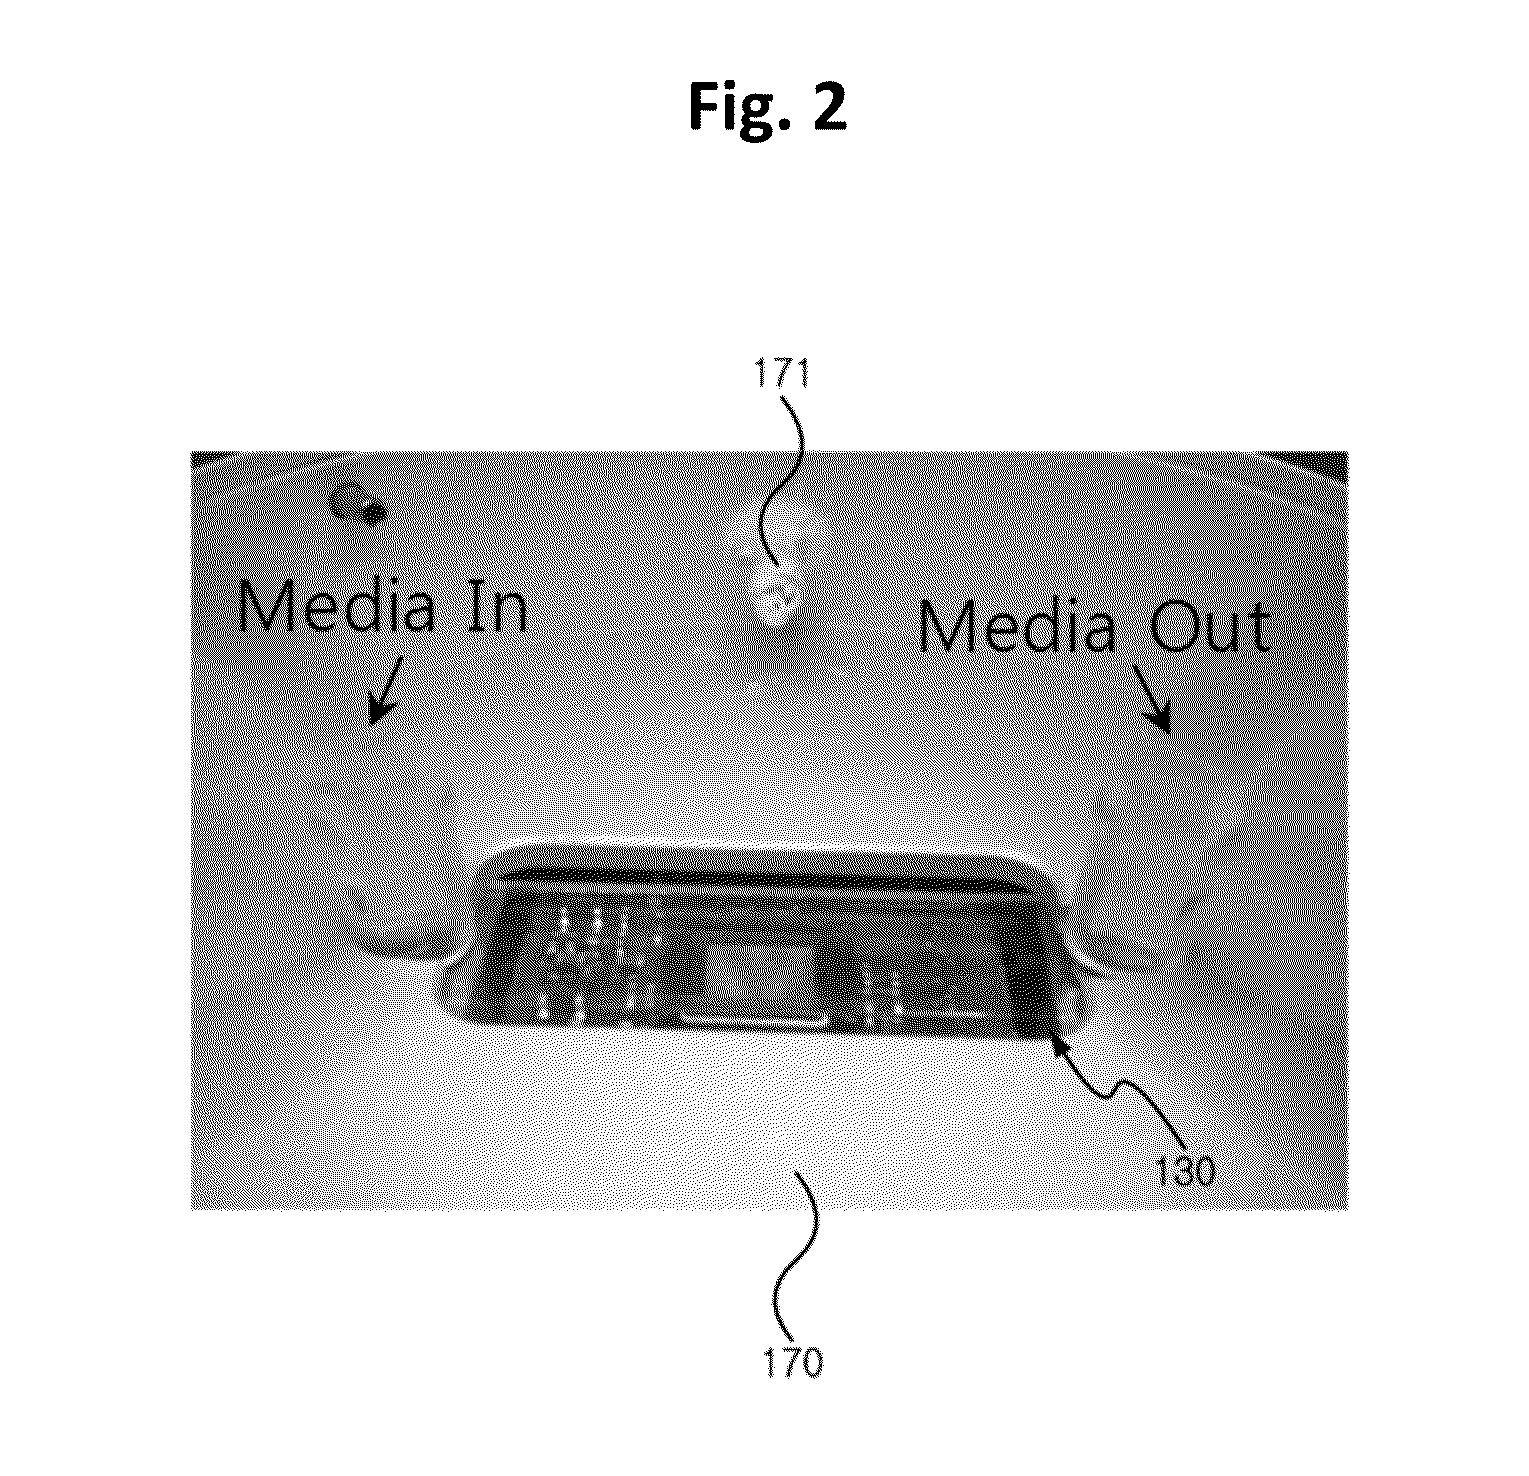 Apparatus for measuring cell activity and method for analyzing cell activity